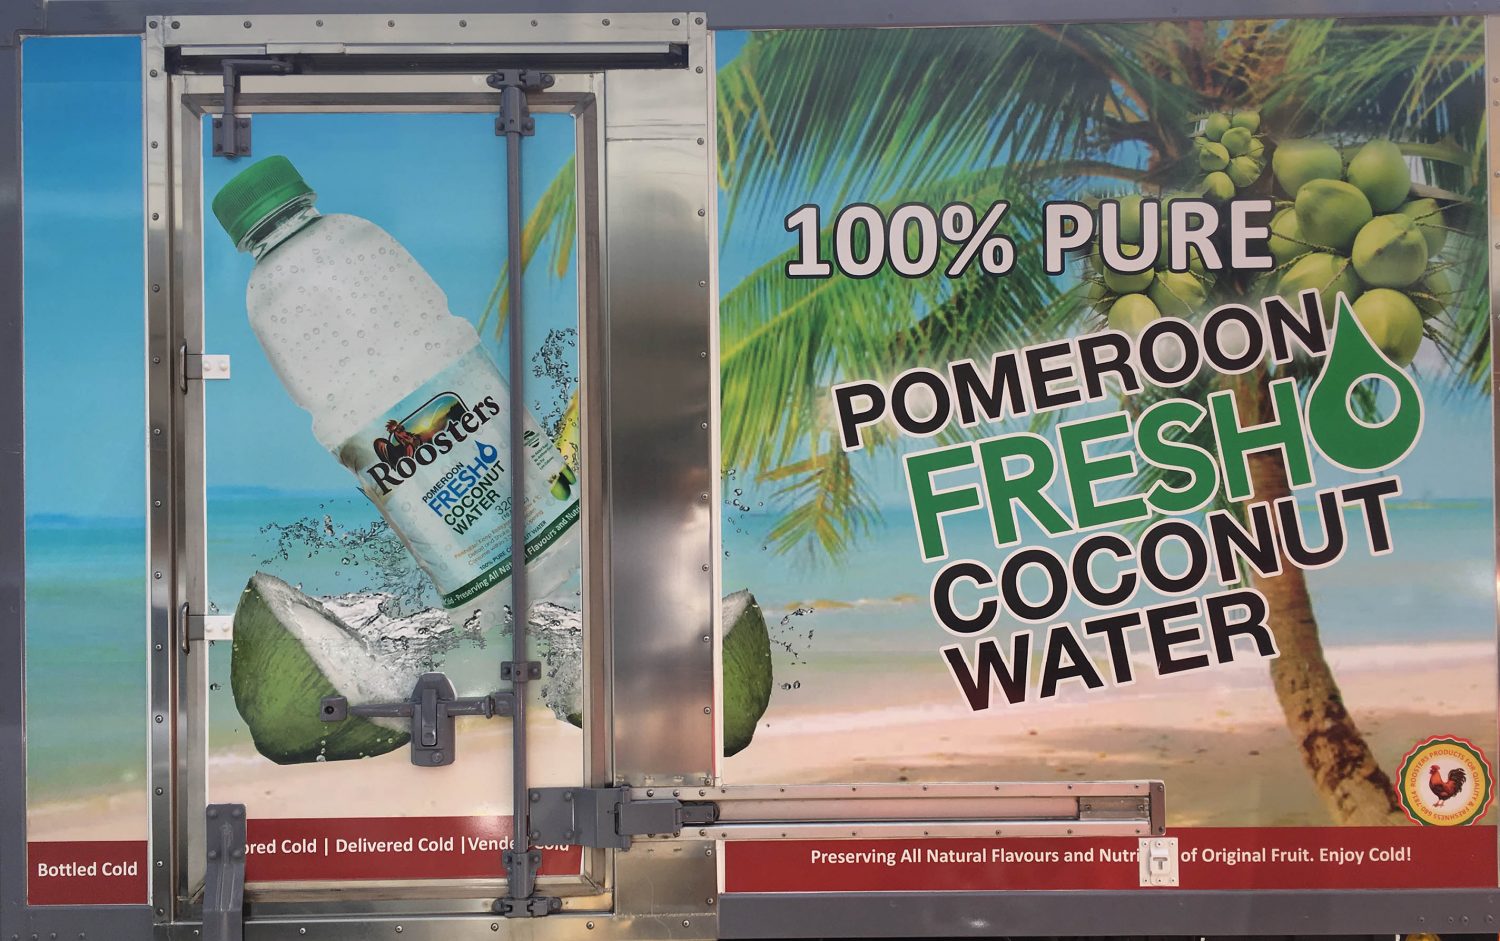 Rooster brand coconut water